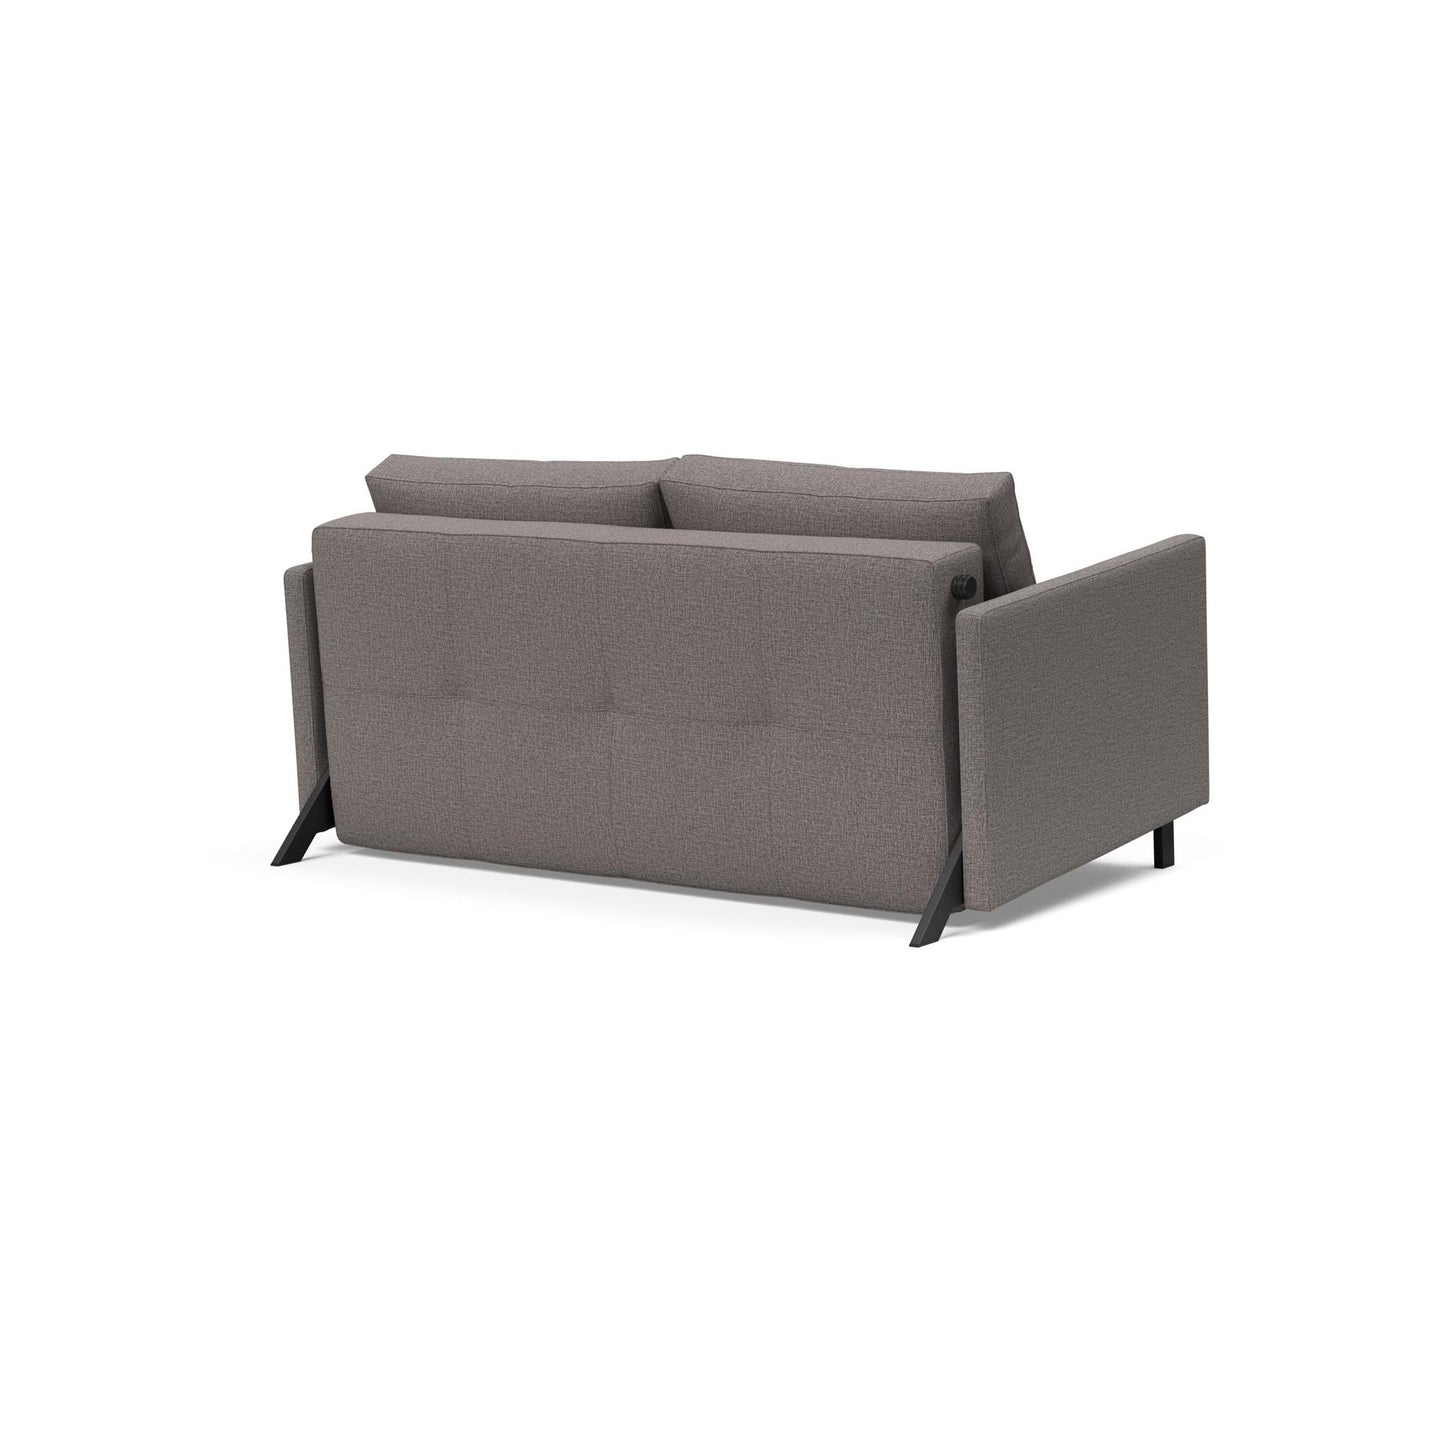 Cubed Deluxe Full Sofa Bed w/Arms in Mixed Dance Gray